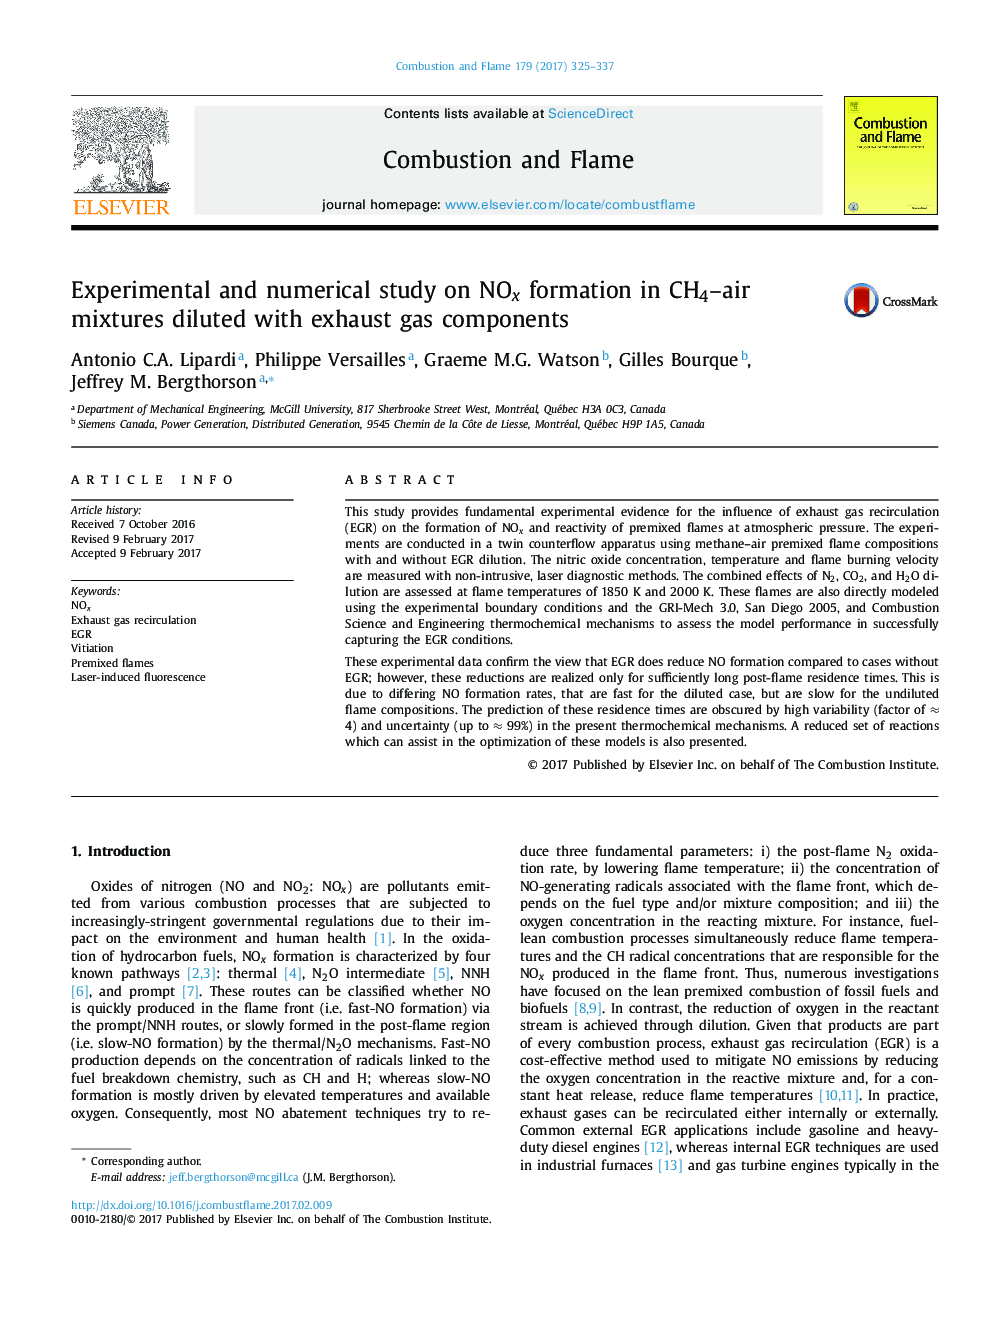 Experimental and numerical study on NOx formation in CH4-air mixtures diluted with exhaust gas components